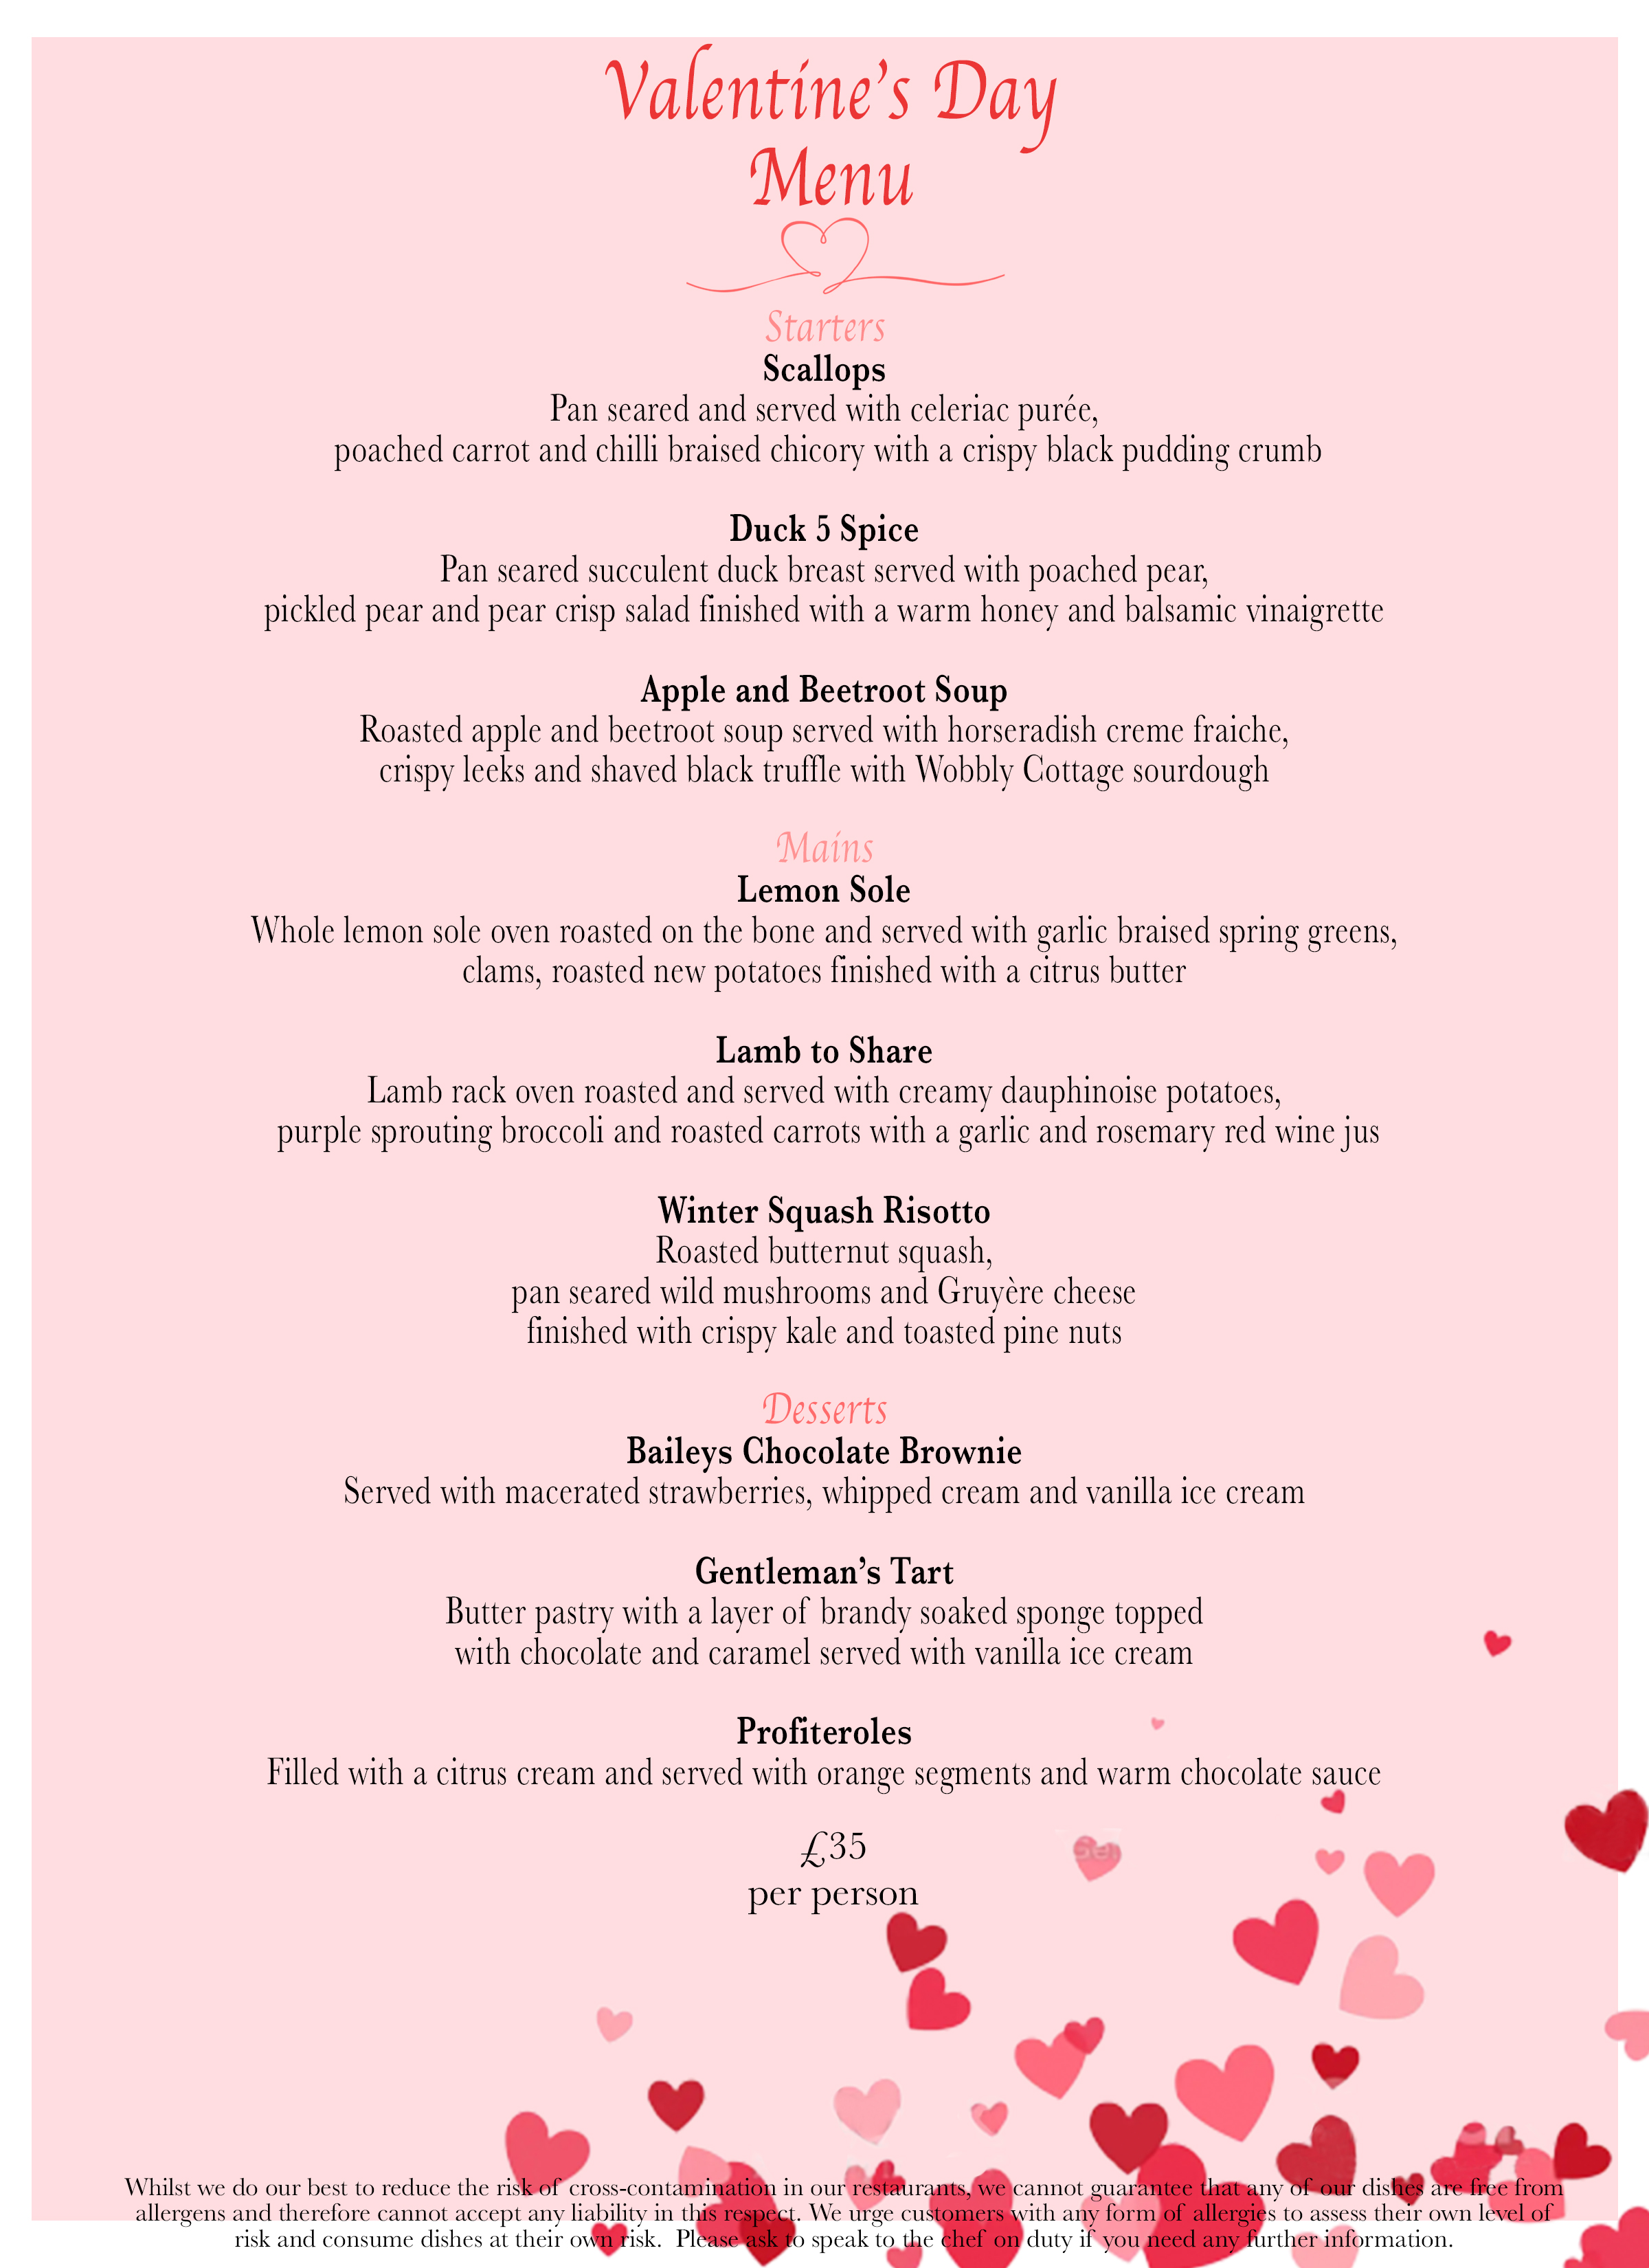 The special Valentine's Day menu is on offer for just £35 per head